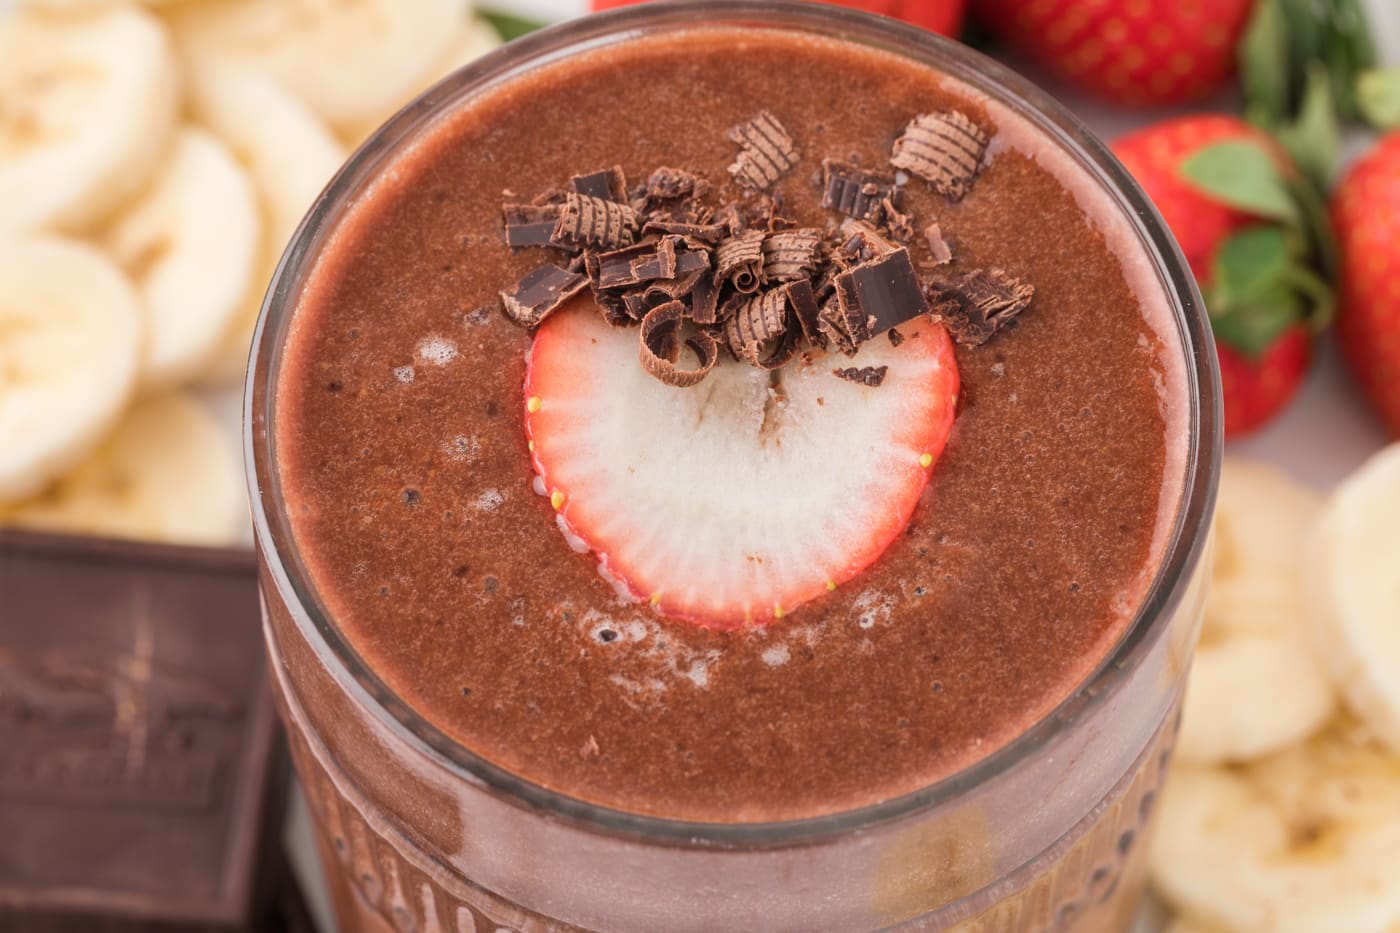 https://www.cleaneatingkitchen.com/wp-content/uploads/2021/01/strawberry-banana-chocolate-smoothie.jpg